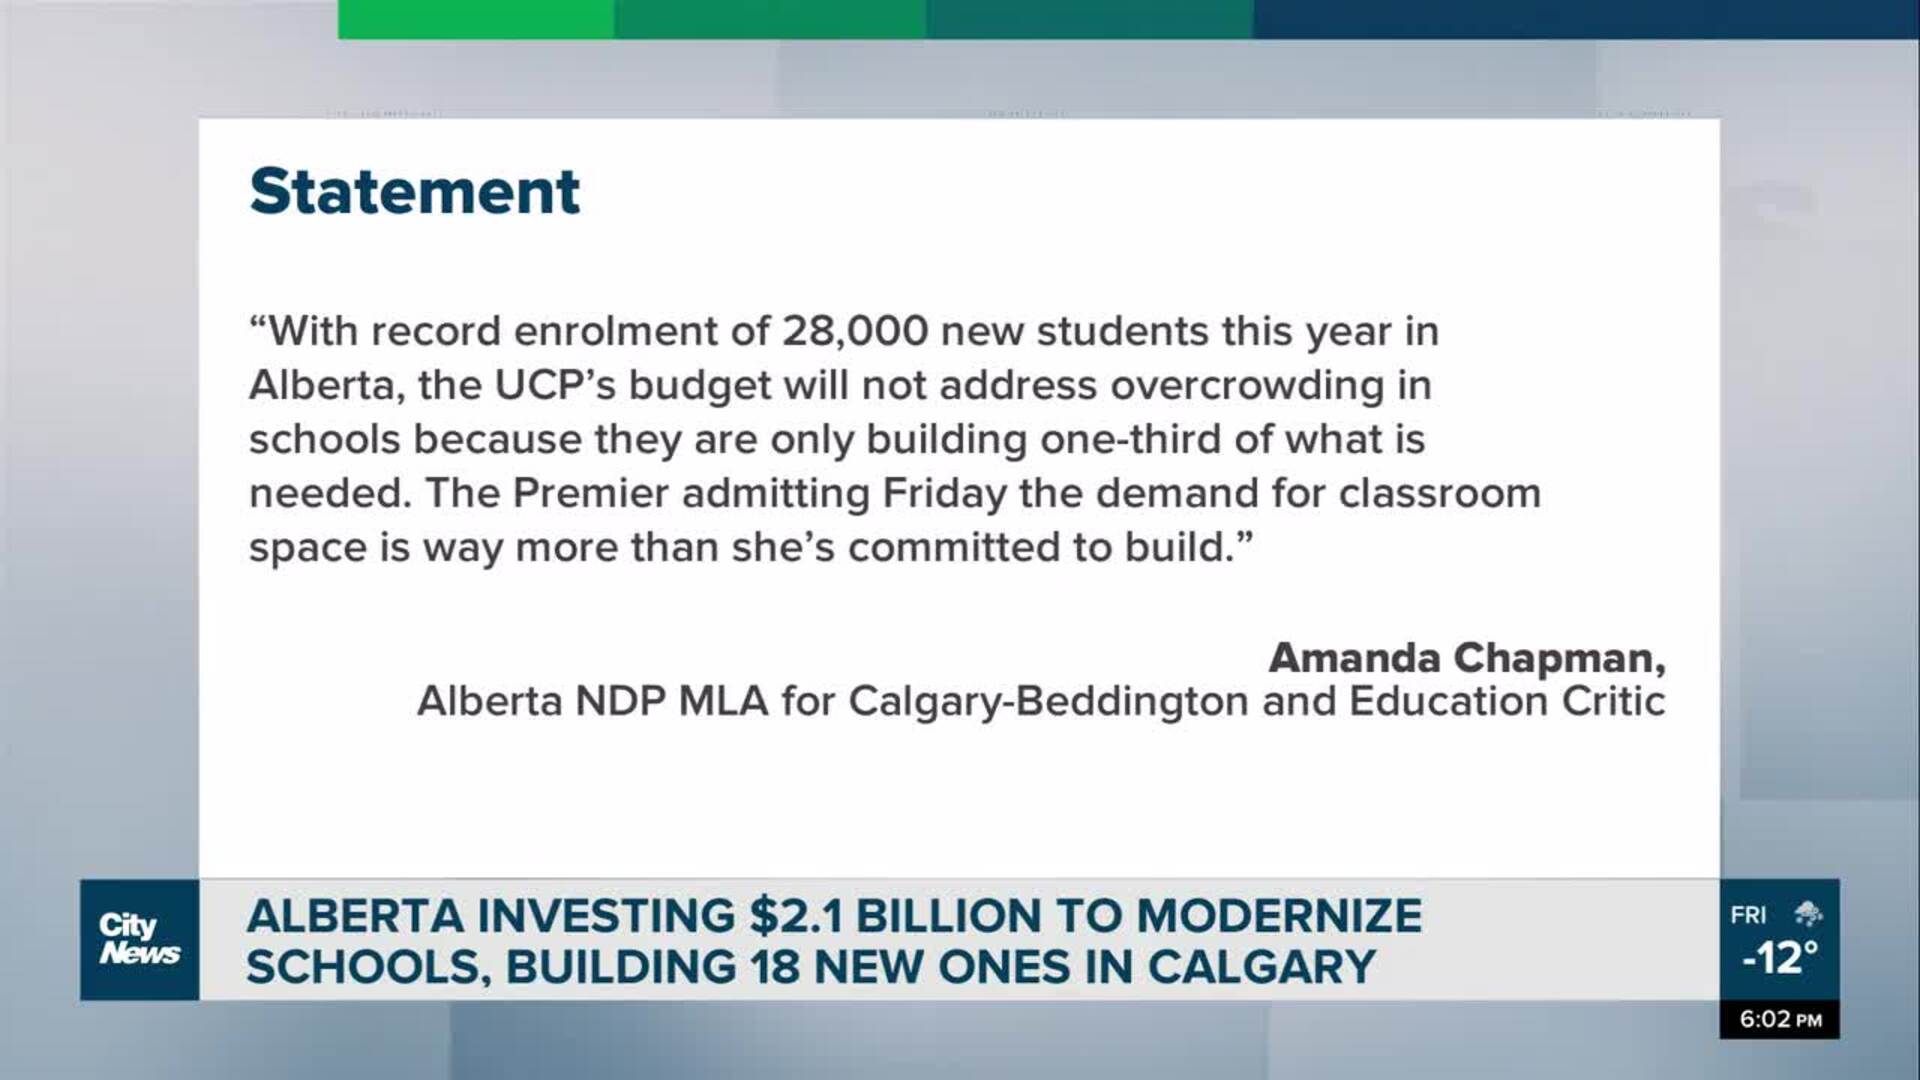 Province investing to modernize and build schools